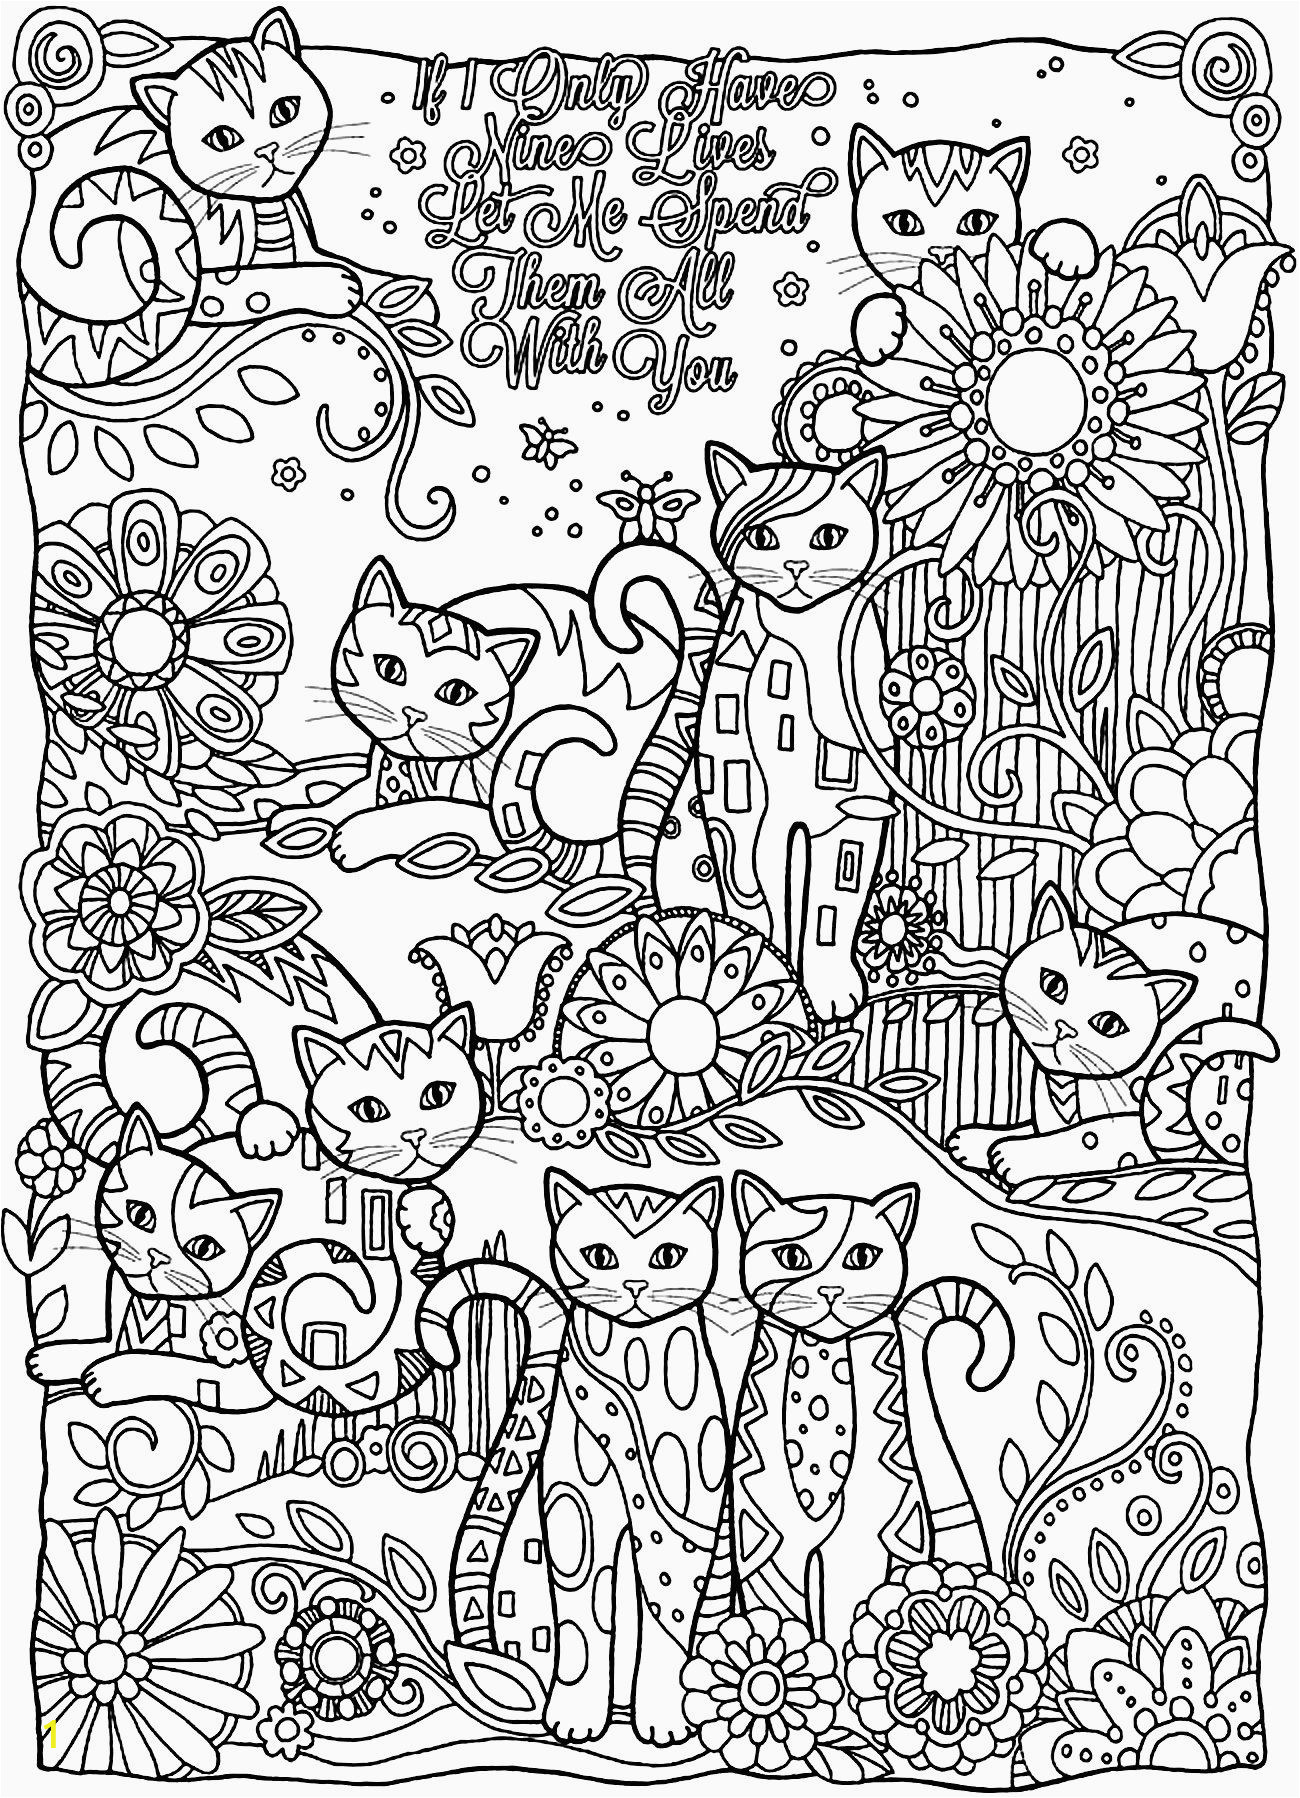 Interactive Coloring Pages for Adults Christmas Coloring Printable Pages